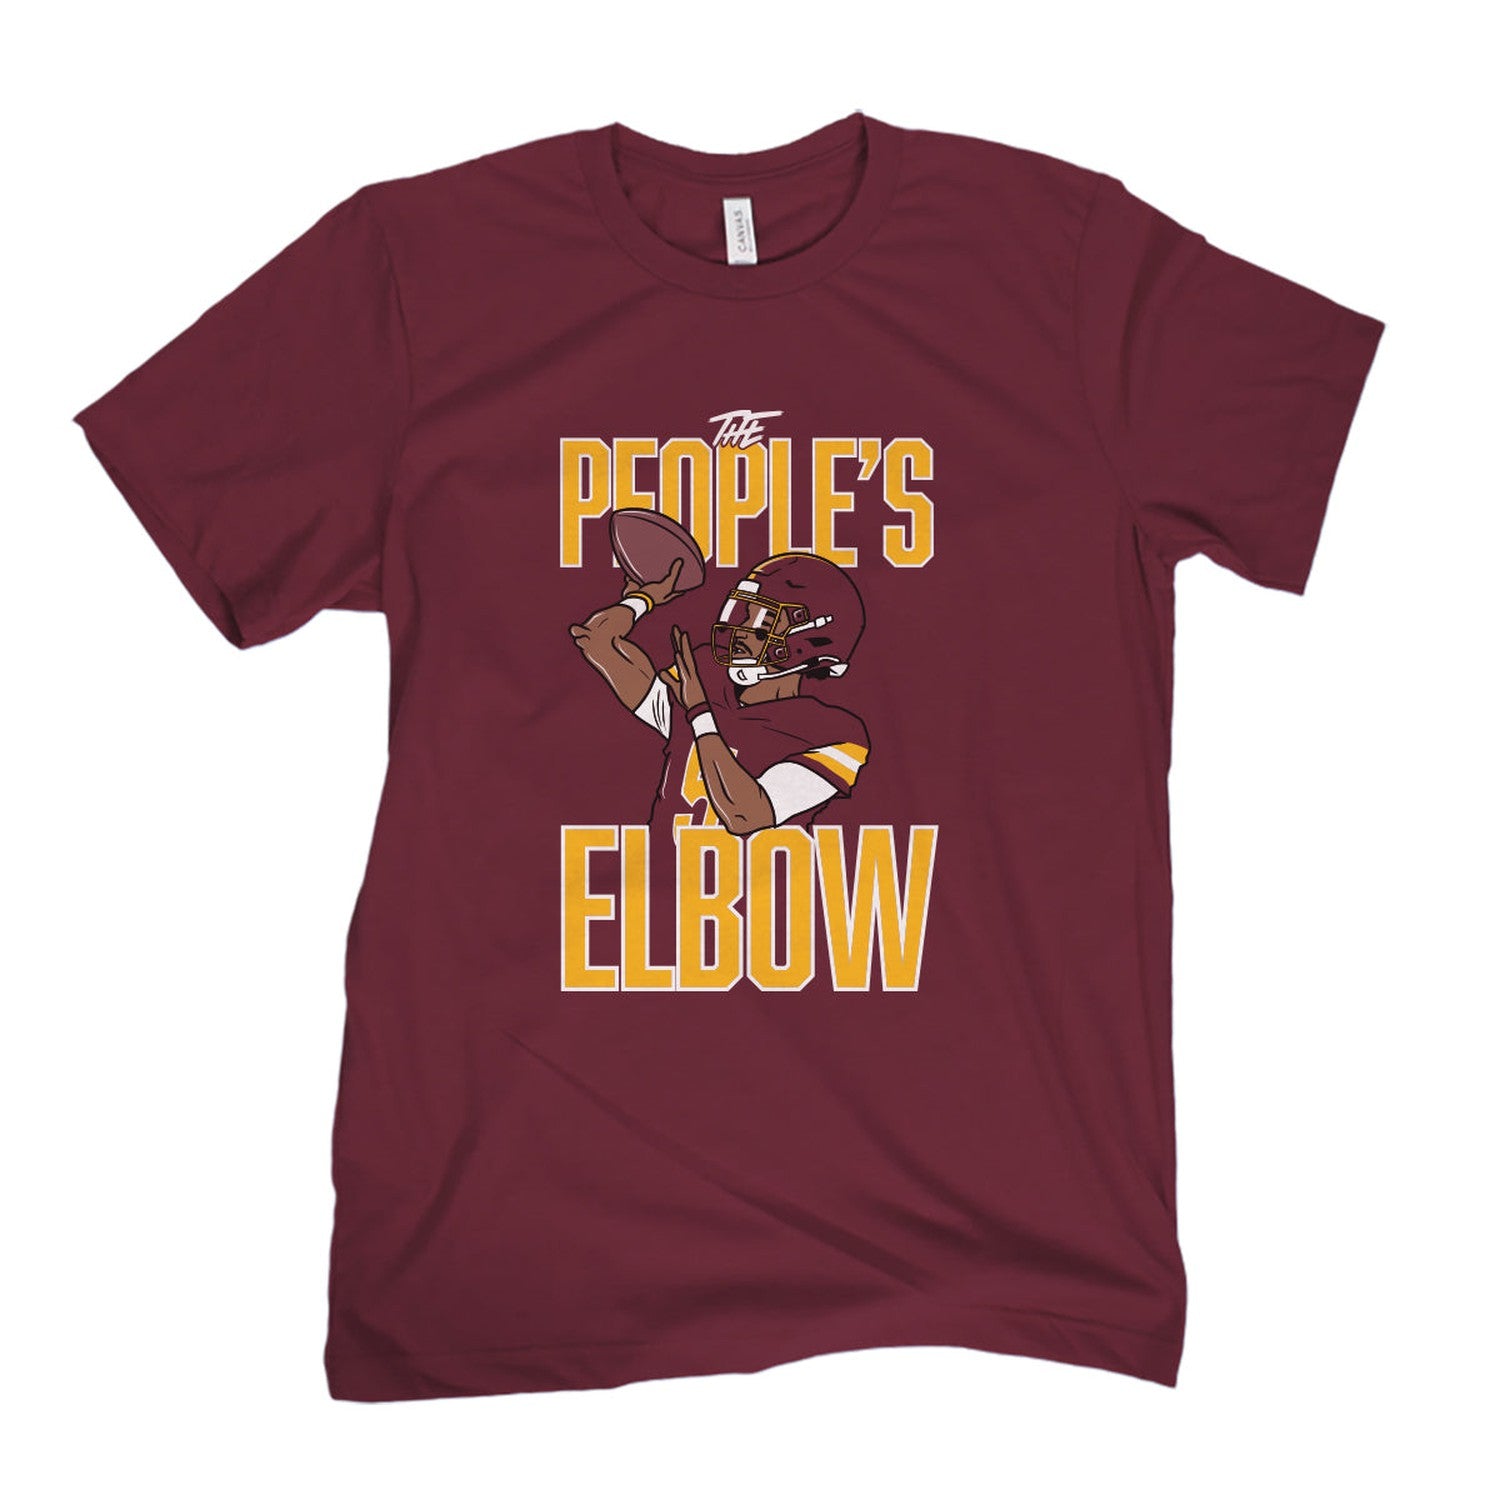 The People's Elbow Tee